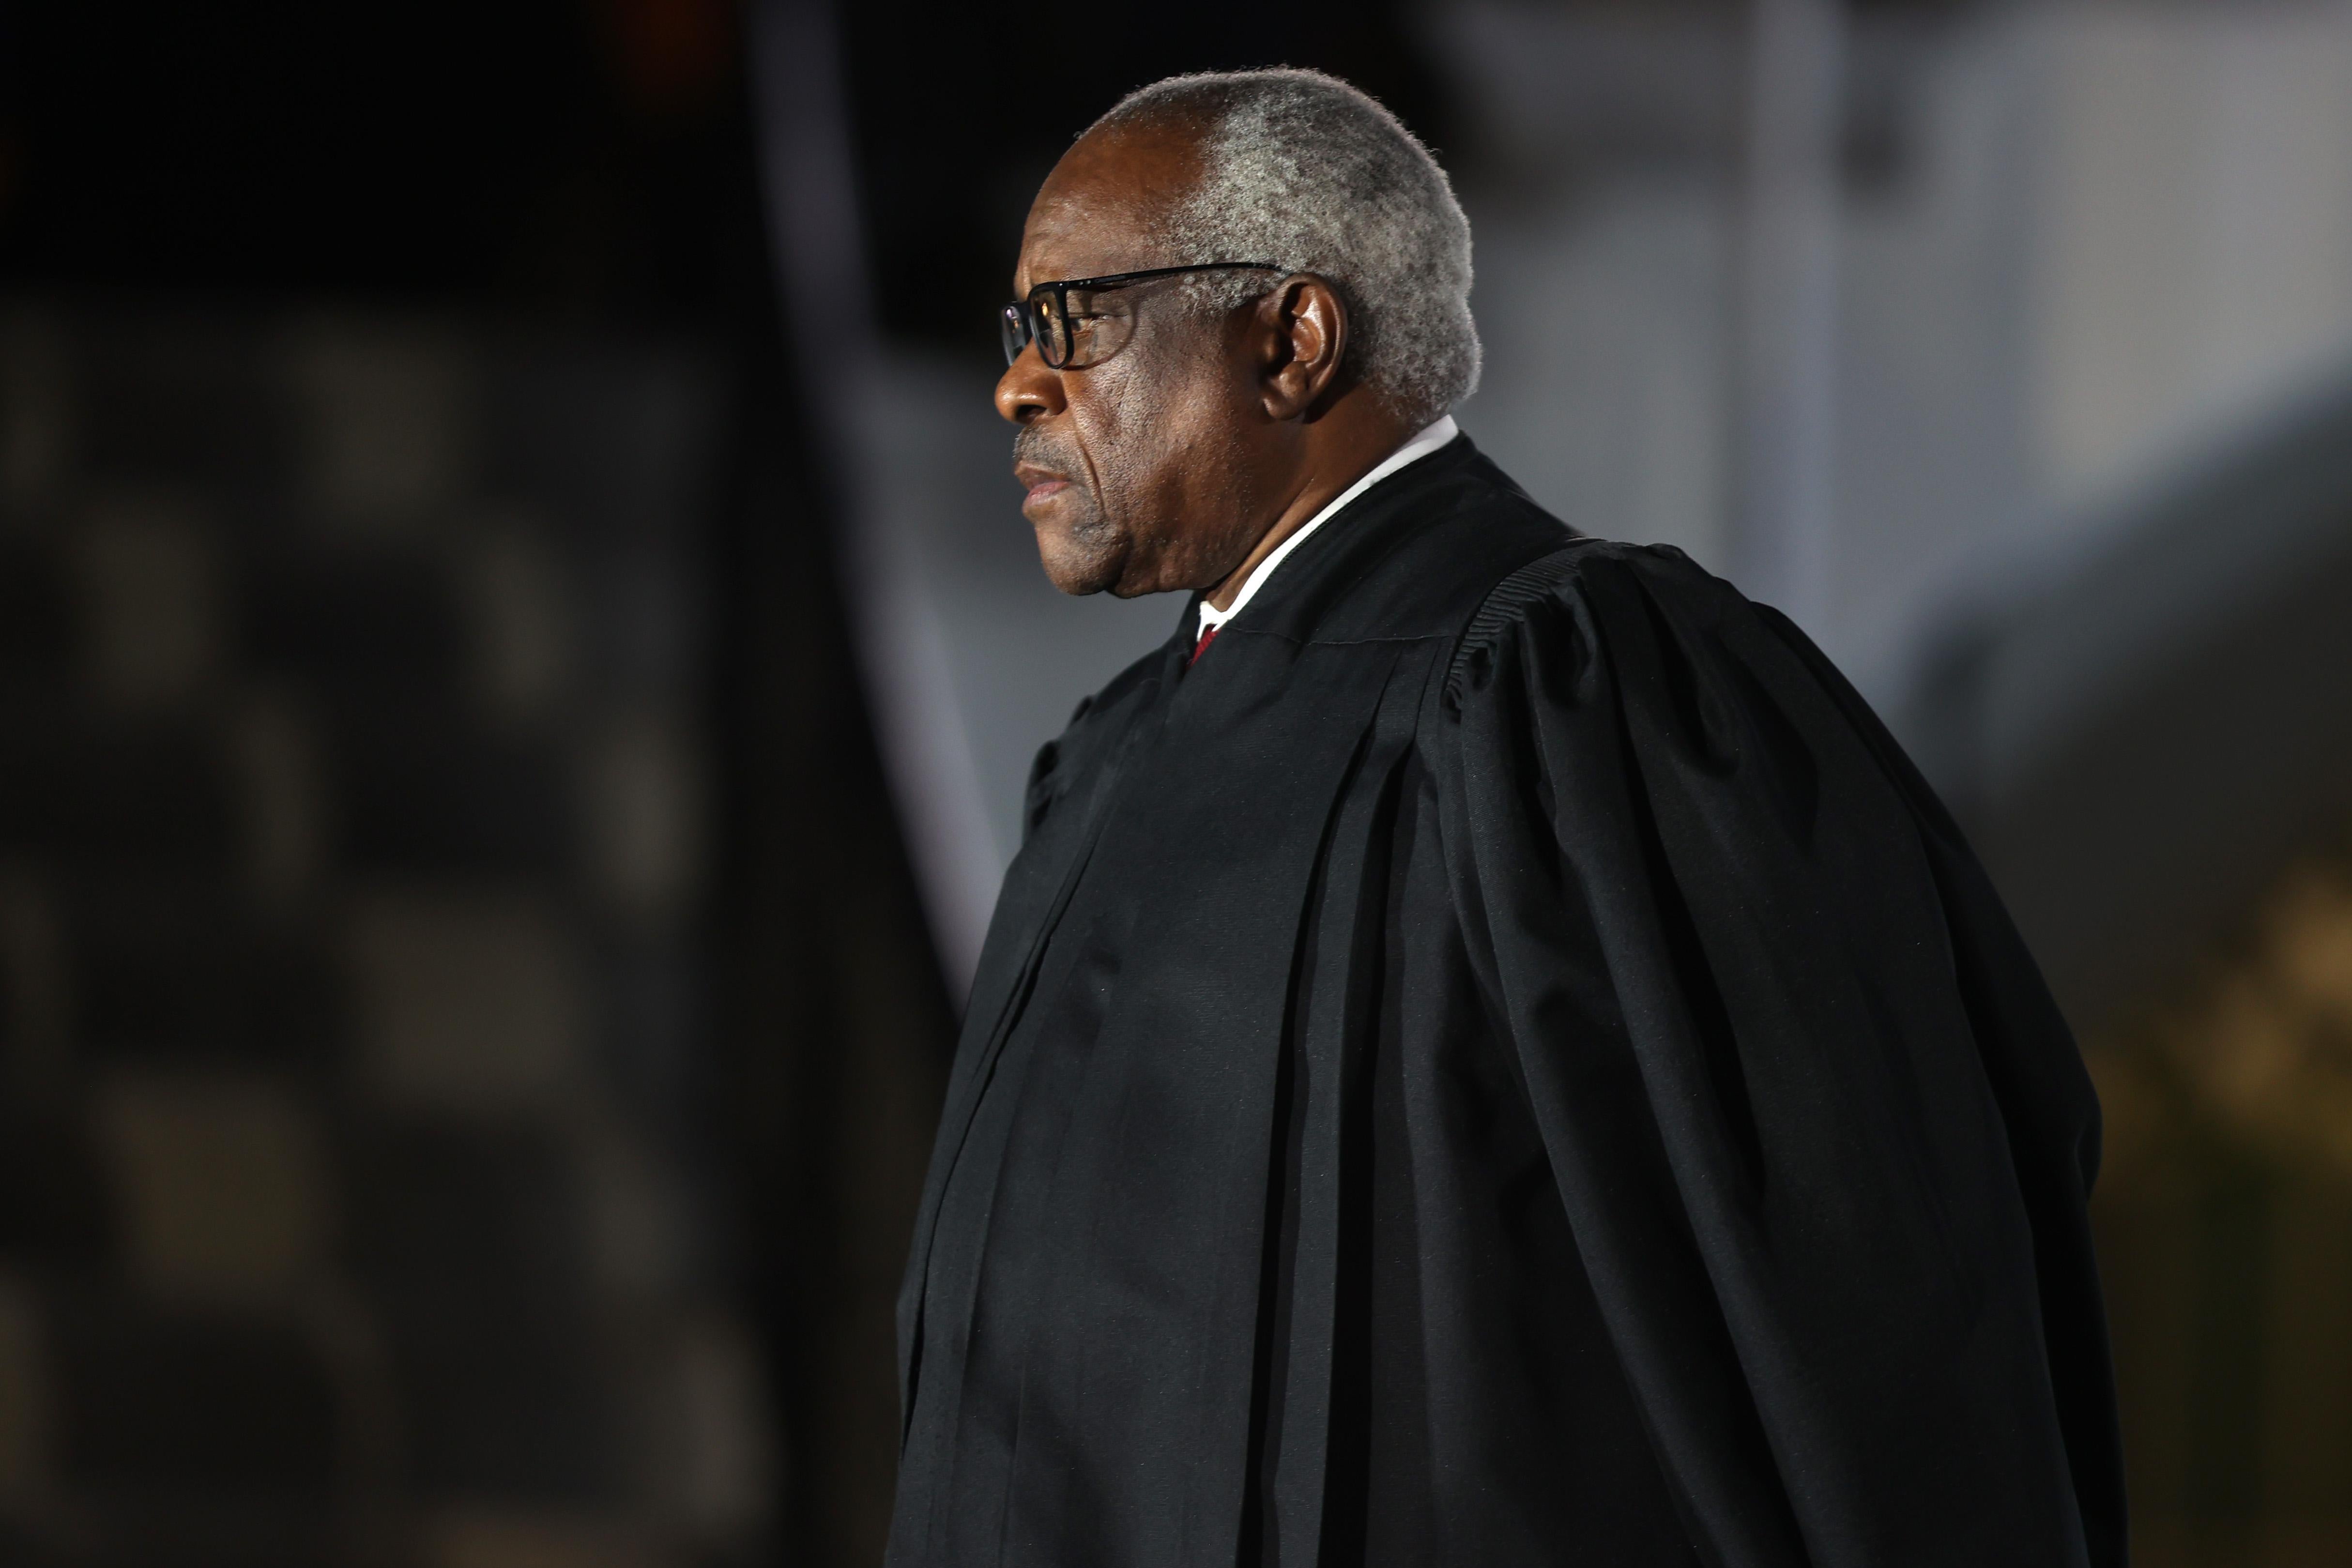 Clarence Thomas wearing his robe and looking serious.